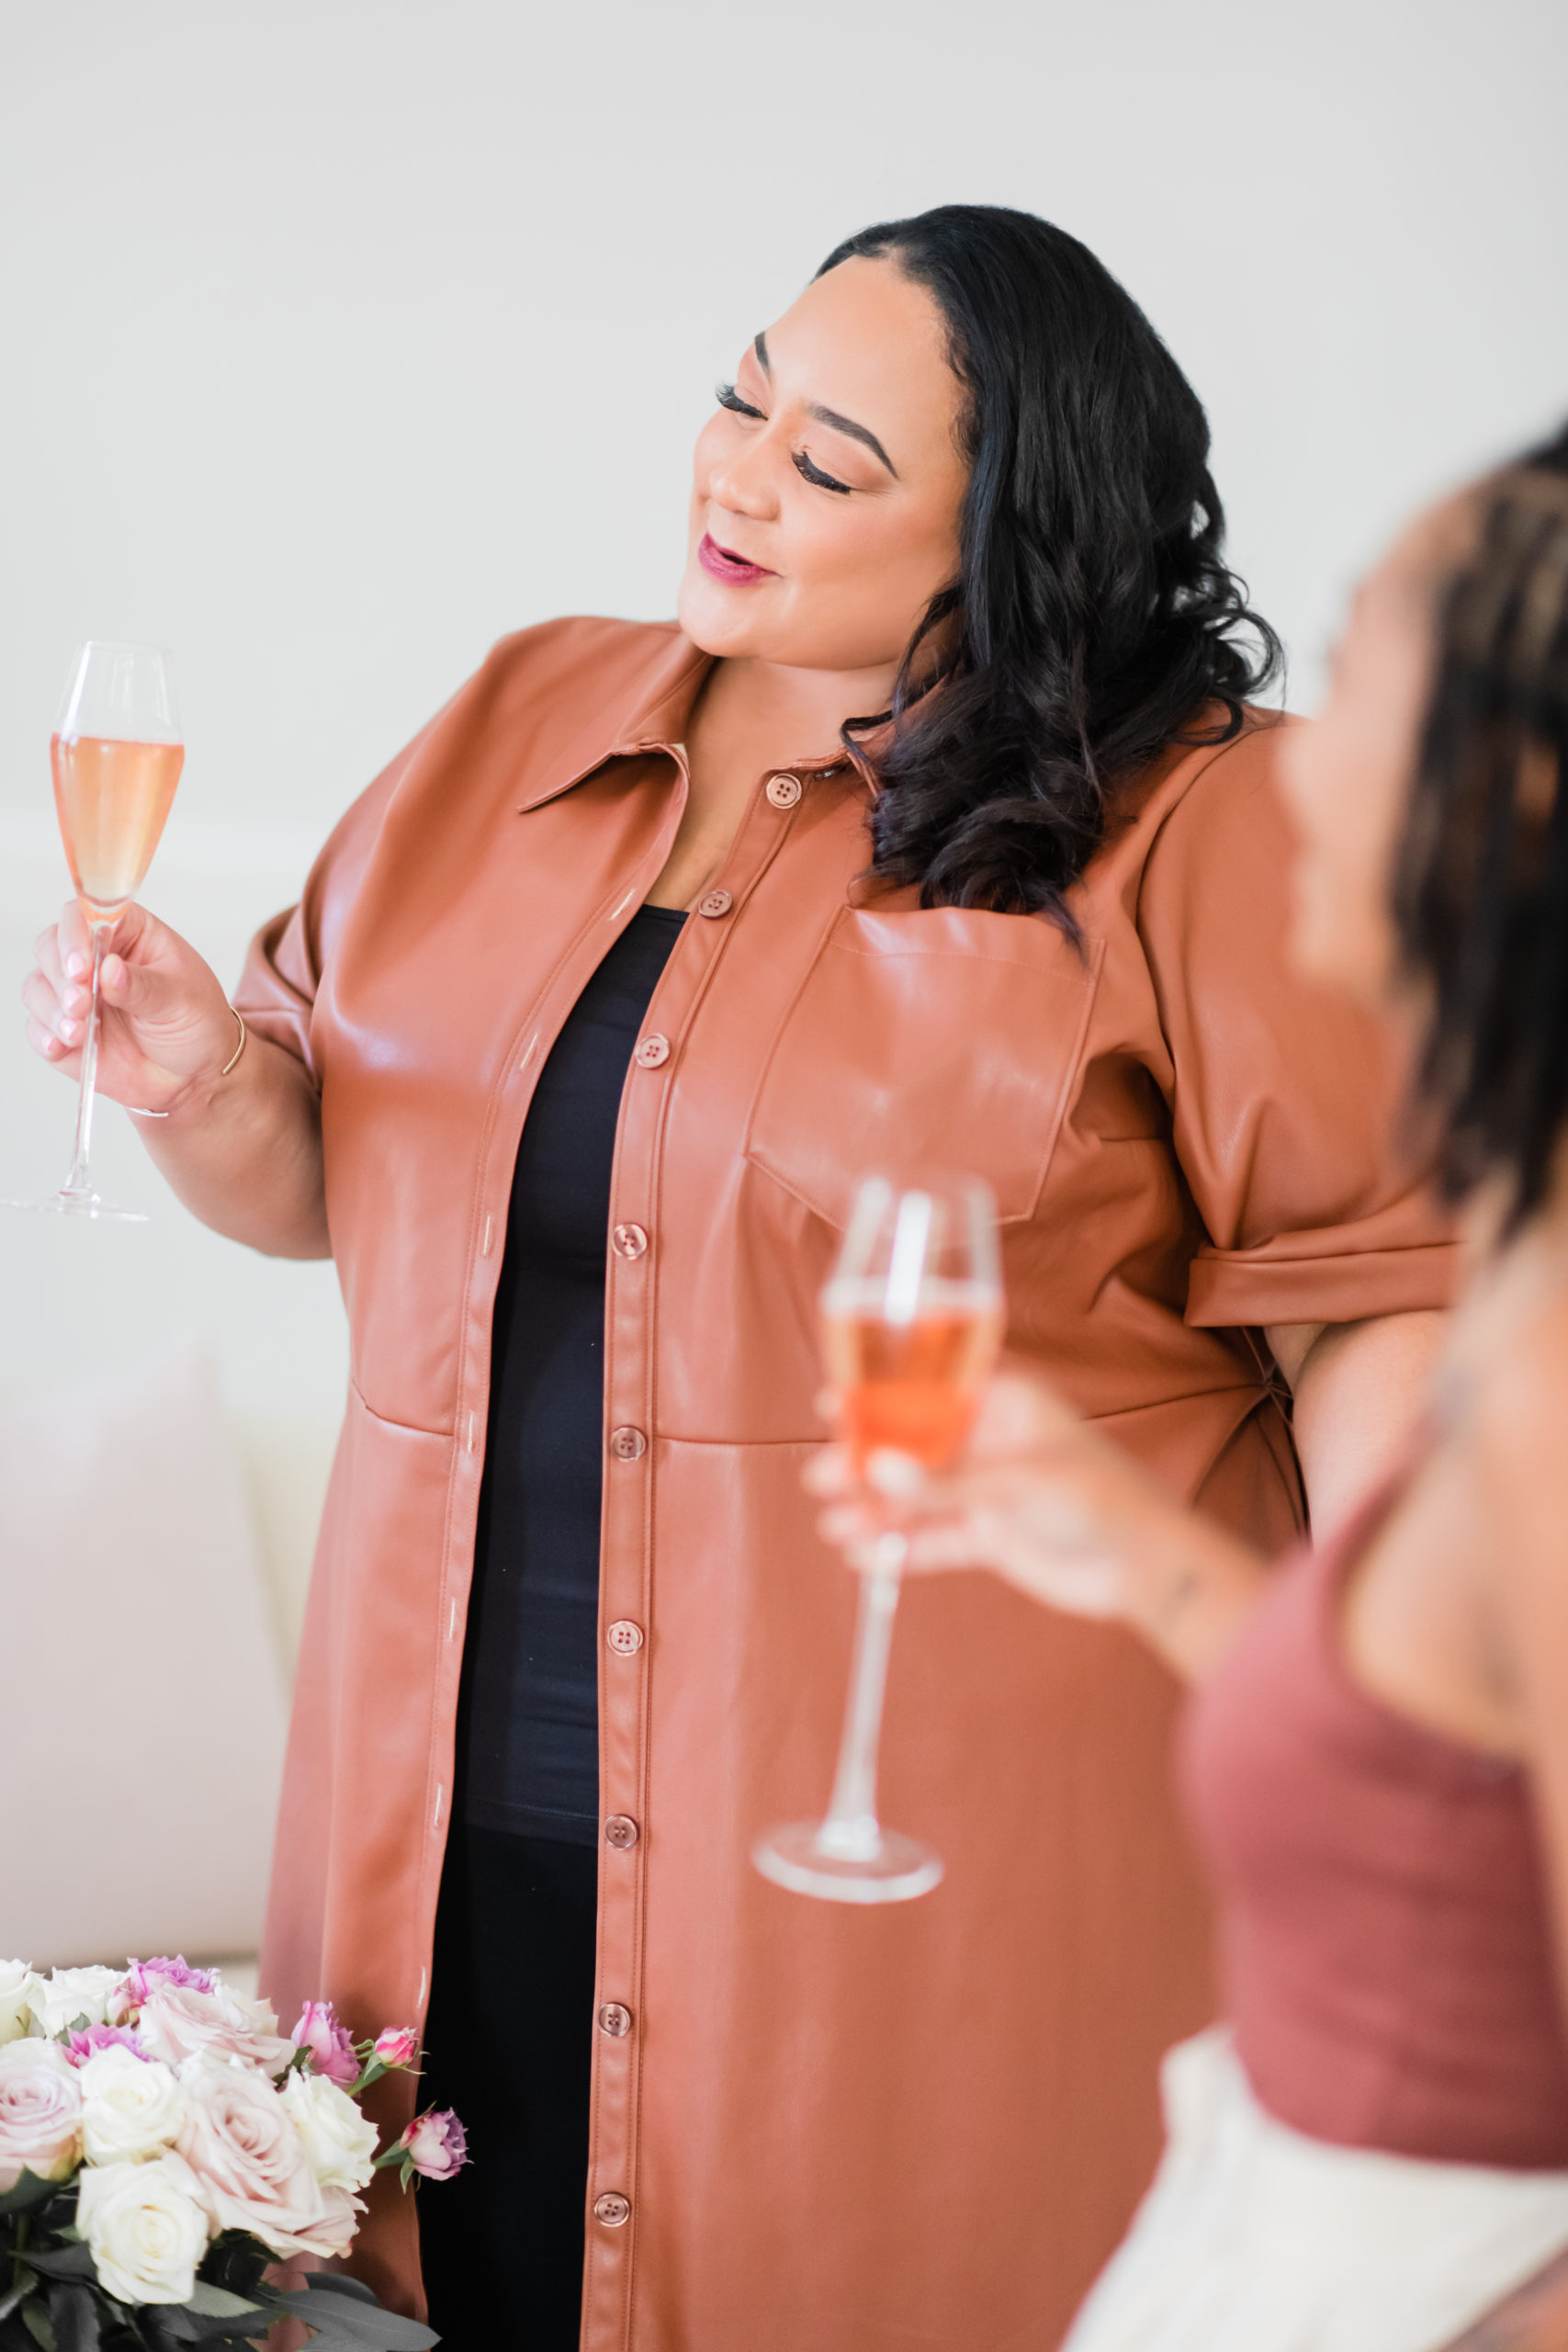 Black woman with champagne doing a toast.